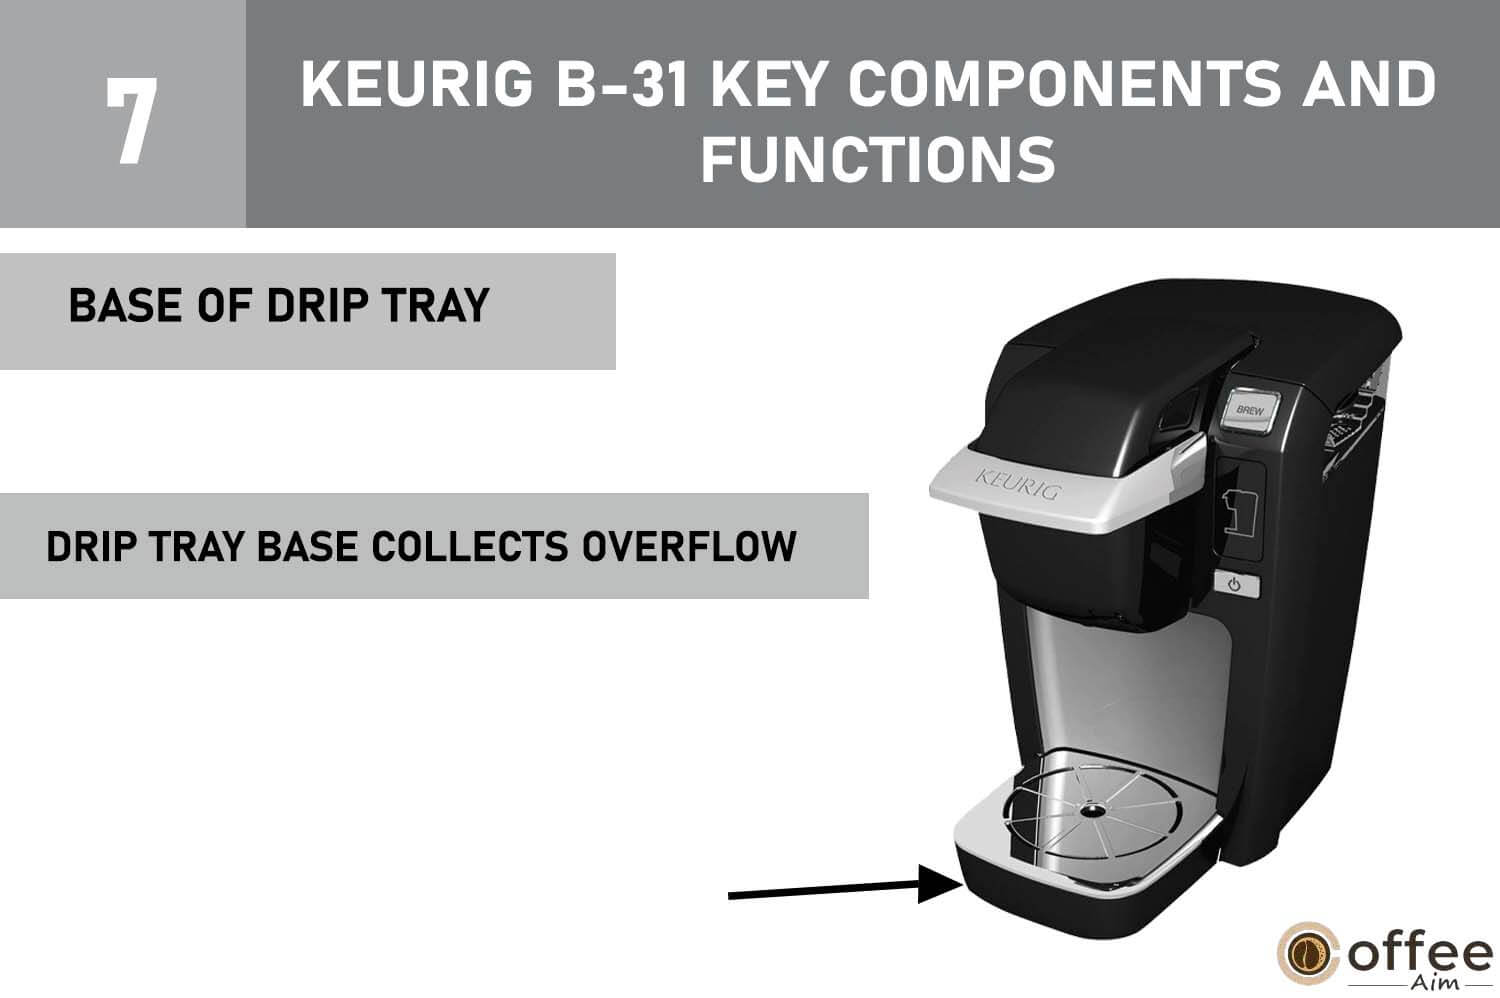 The provided image illustrates the component known as the "Base of Drip Tray" for the Keurig B-31 coffee maker, featured in the article "How To Use Keurig B-31."